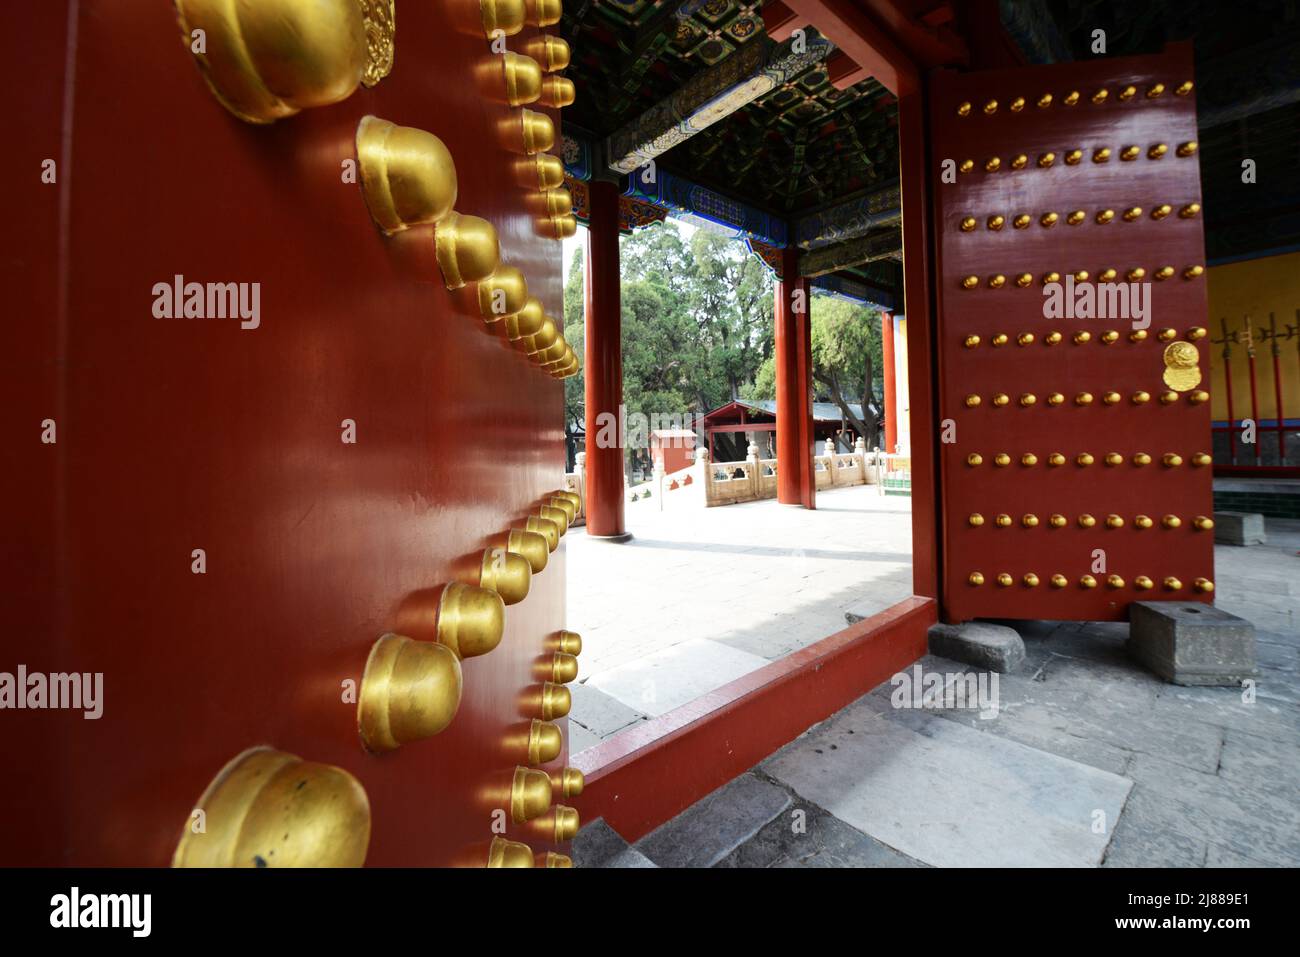 Colorful giant doors at the entrance of the Temple of Confucius in Beijing, China. Stock Photo